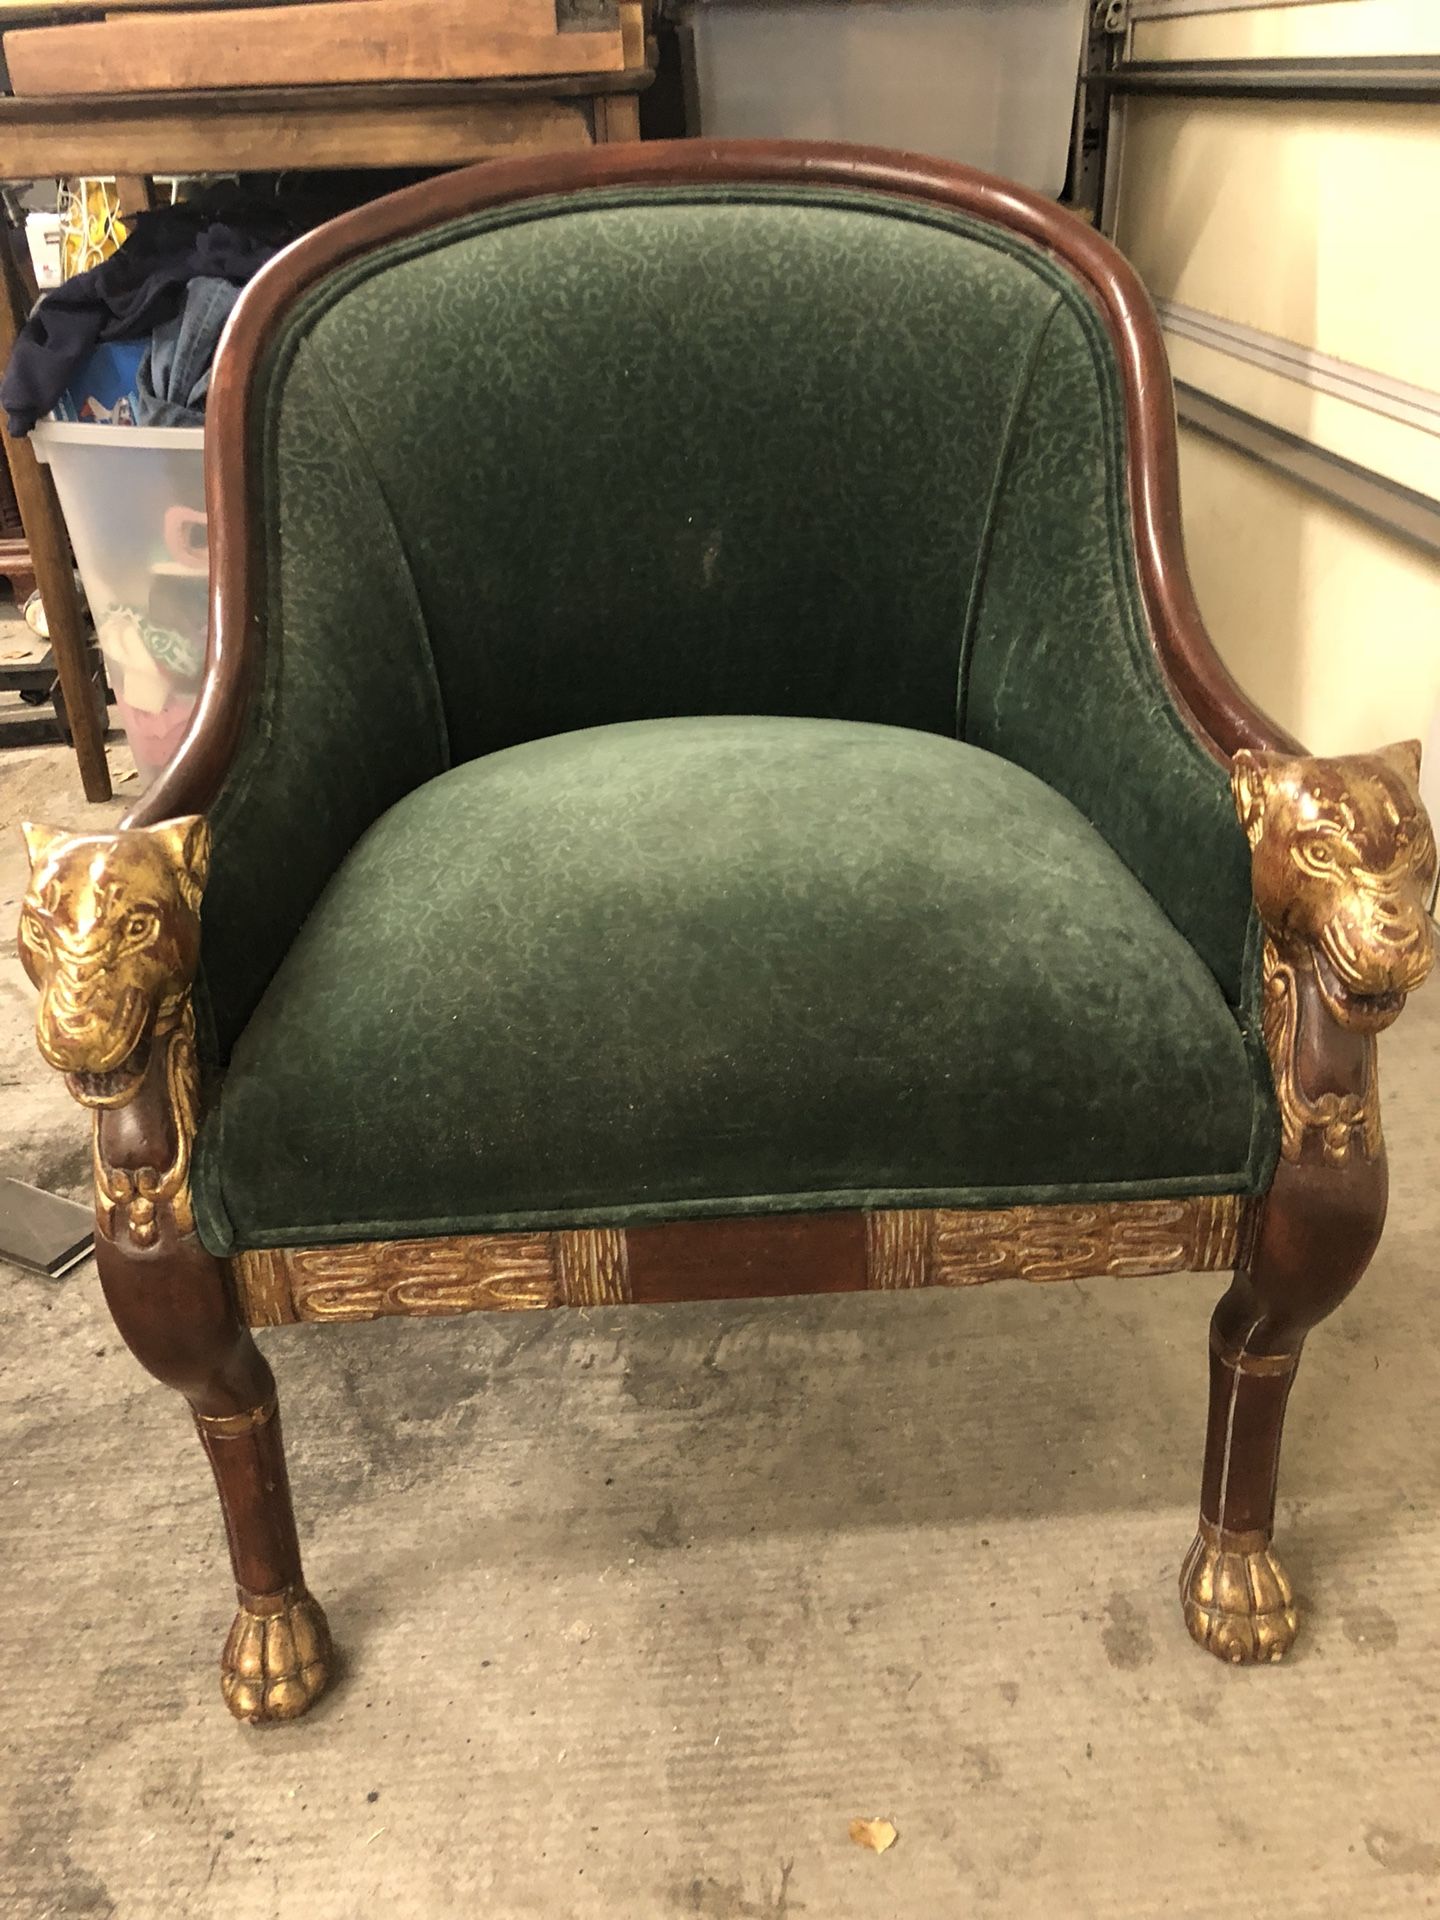 Antique French chair. Has another one like it sold separately